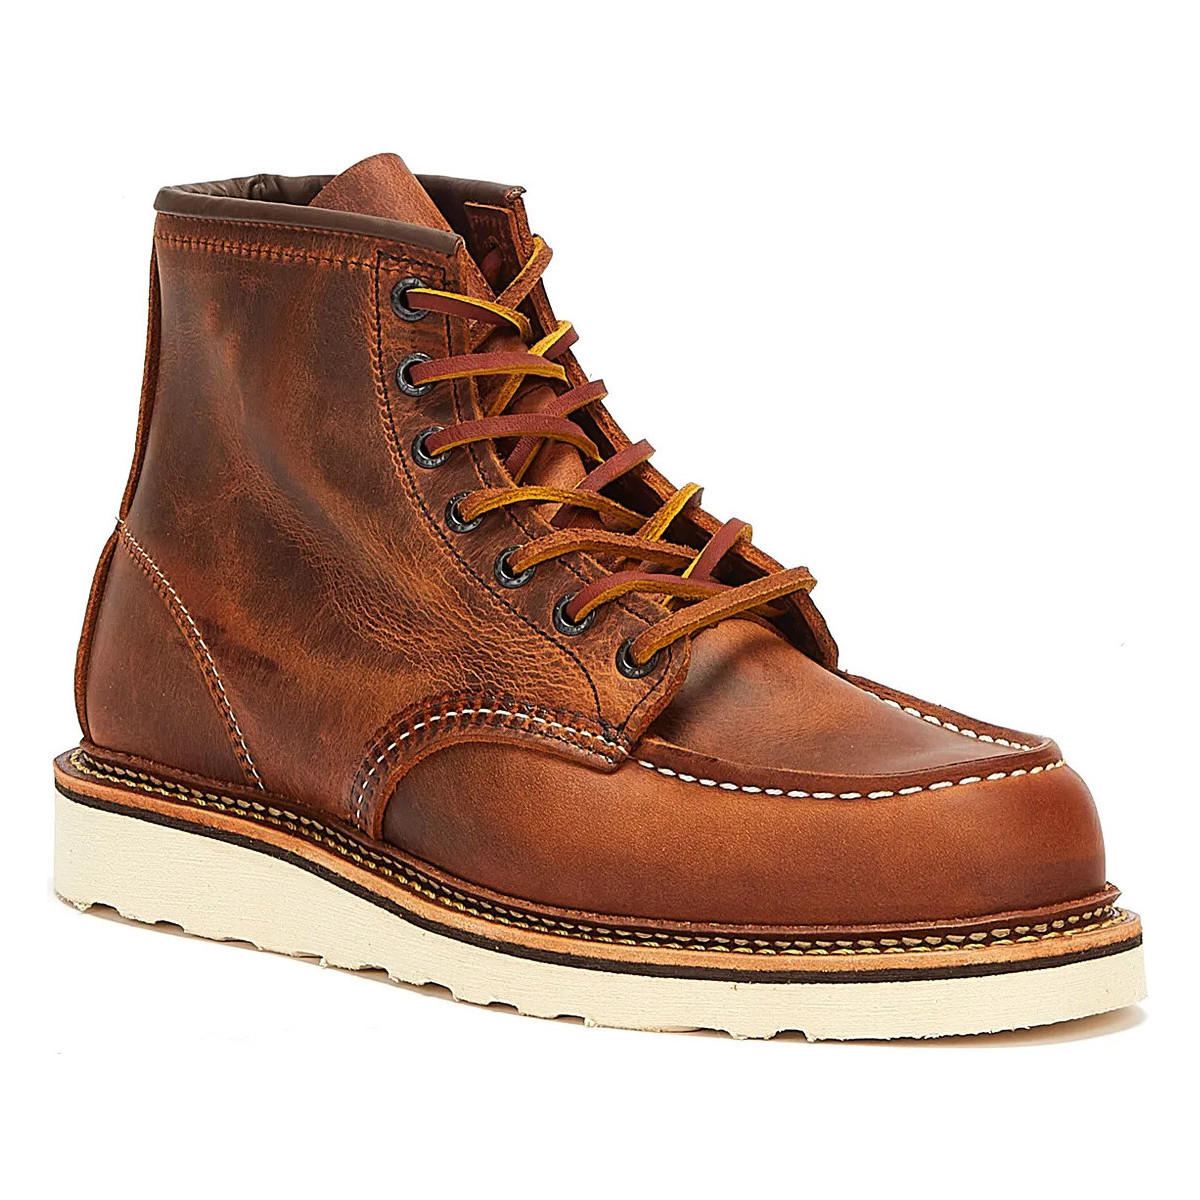 Red Wing Classic Moc Toe R&t Mens Copper Brown Boots Brown